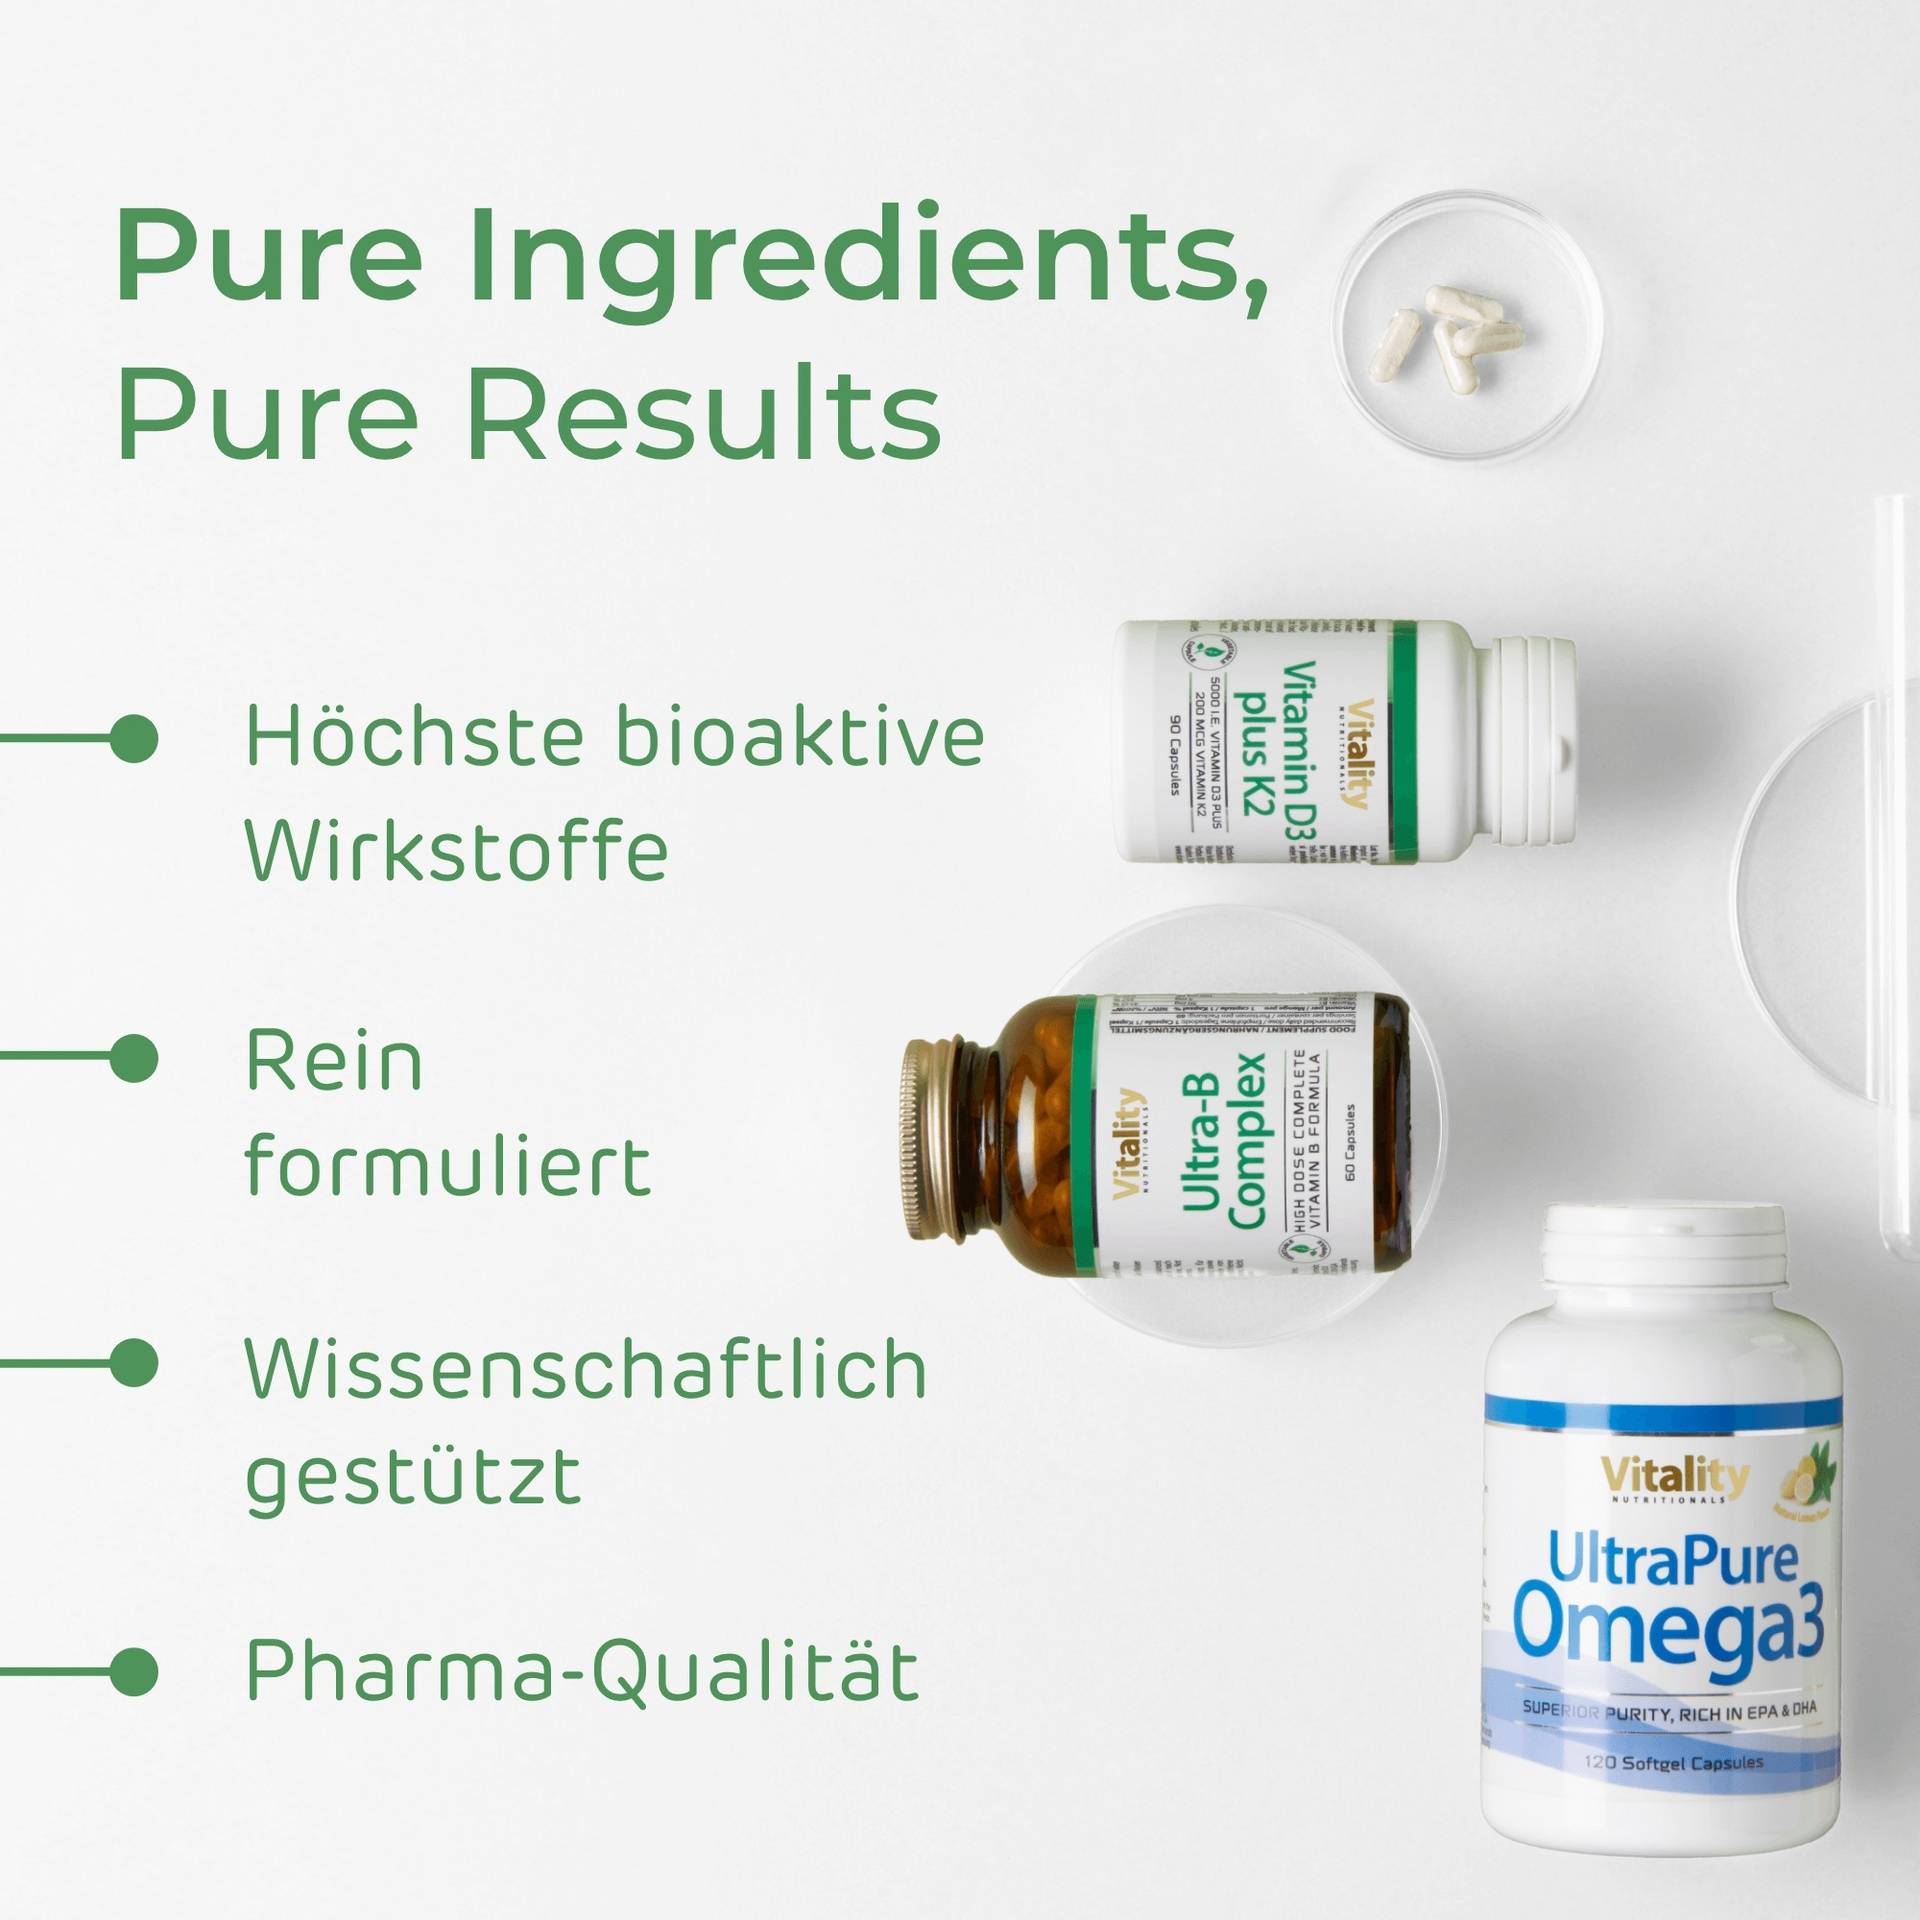 2000x2000_Pure Ingredients,Pure Results_clean_DE.png